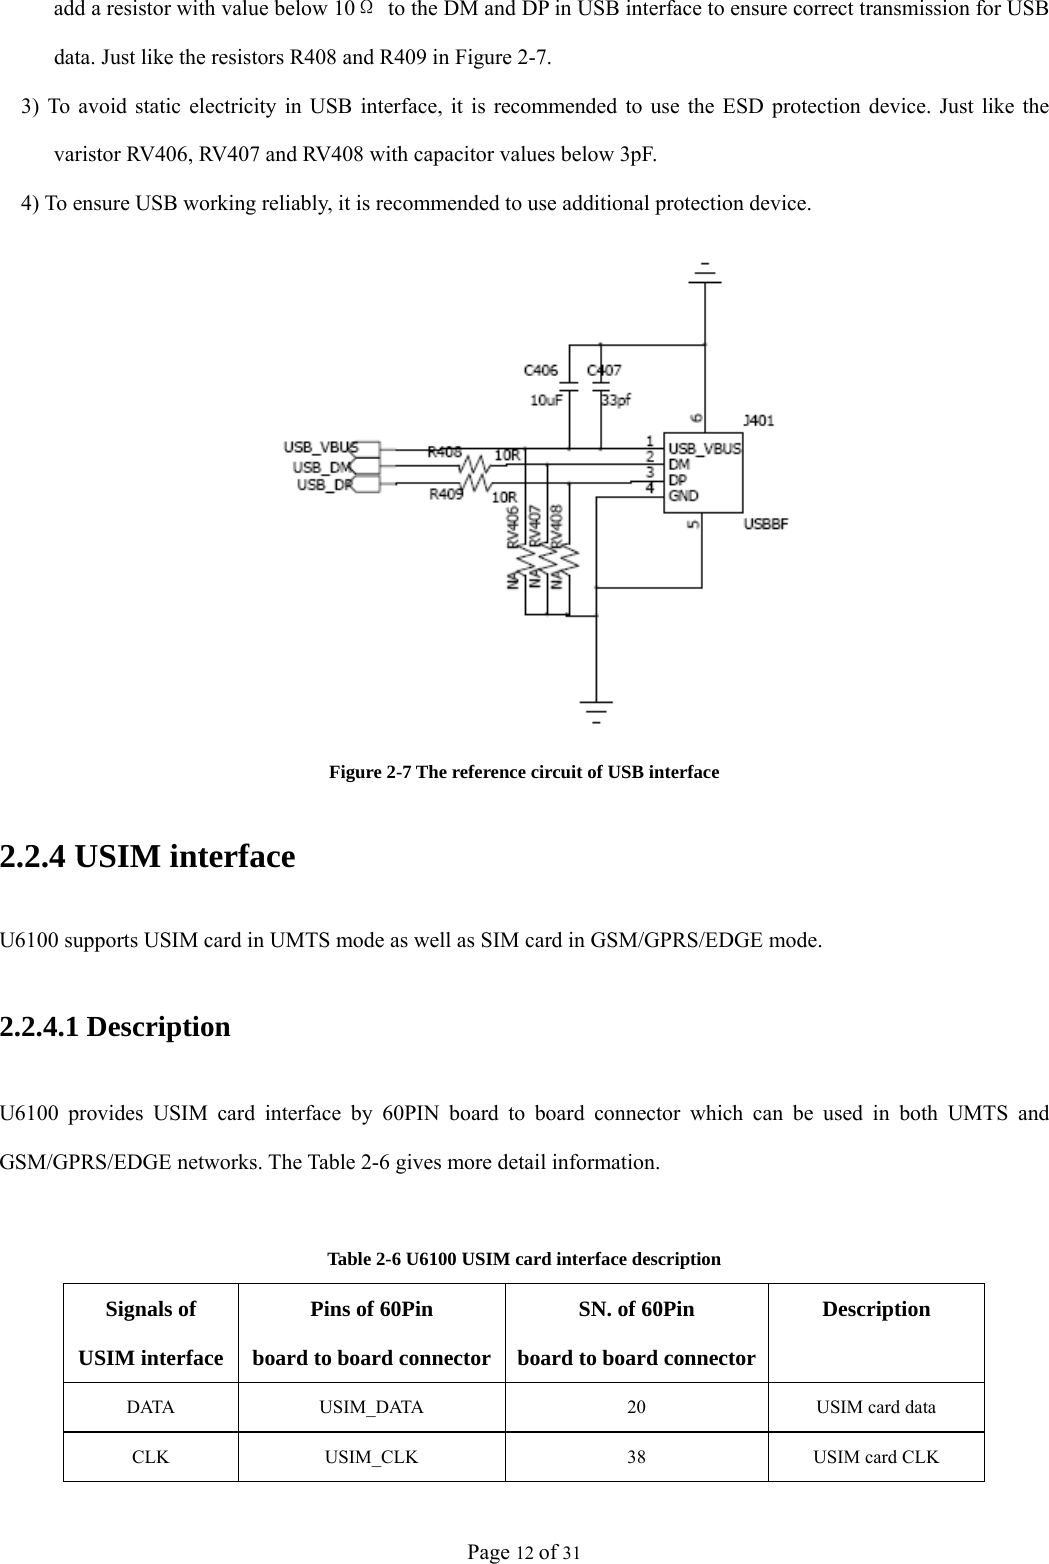 Page 12 of 31 add a resistor with value below 10Ω  to the DM and DP in USB interface to ensure correct transmission for USB data. Just like the resistors R408 and R409 in Figure 2-7. 3) To avoid static electricity in USB interface, it is recommended to use the ESD protection device. Just like the varistor RV406, RV407 and RV408 with capacitor values below 3pF. 4) To ensure USB working reliably, it is recommended to use additional protection device.  Figure 2-7 The reference circuit of USB interface 2.2.4 USIM interface U6100 supports USIM card in UMTS mode as well as SIM card in GSM/GPRS/EDGE mode. 2.2.4.1 Description U6100 provides USIM card interface by 60PIN board to board connector which can be used in both UMTS and GSM/GPRS/EDGE networks. The Table 2-6 gives more detail information.  Table 2-6 U6100 USIM card interface description Signals of USIM interface Pins of 60Pin board to board connectorSN. of 60Pin board to board connectorDescription DATA  USIM_DATA  20  USIM card data CLK  USIM_CLK  38  USIM card CLK 